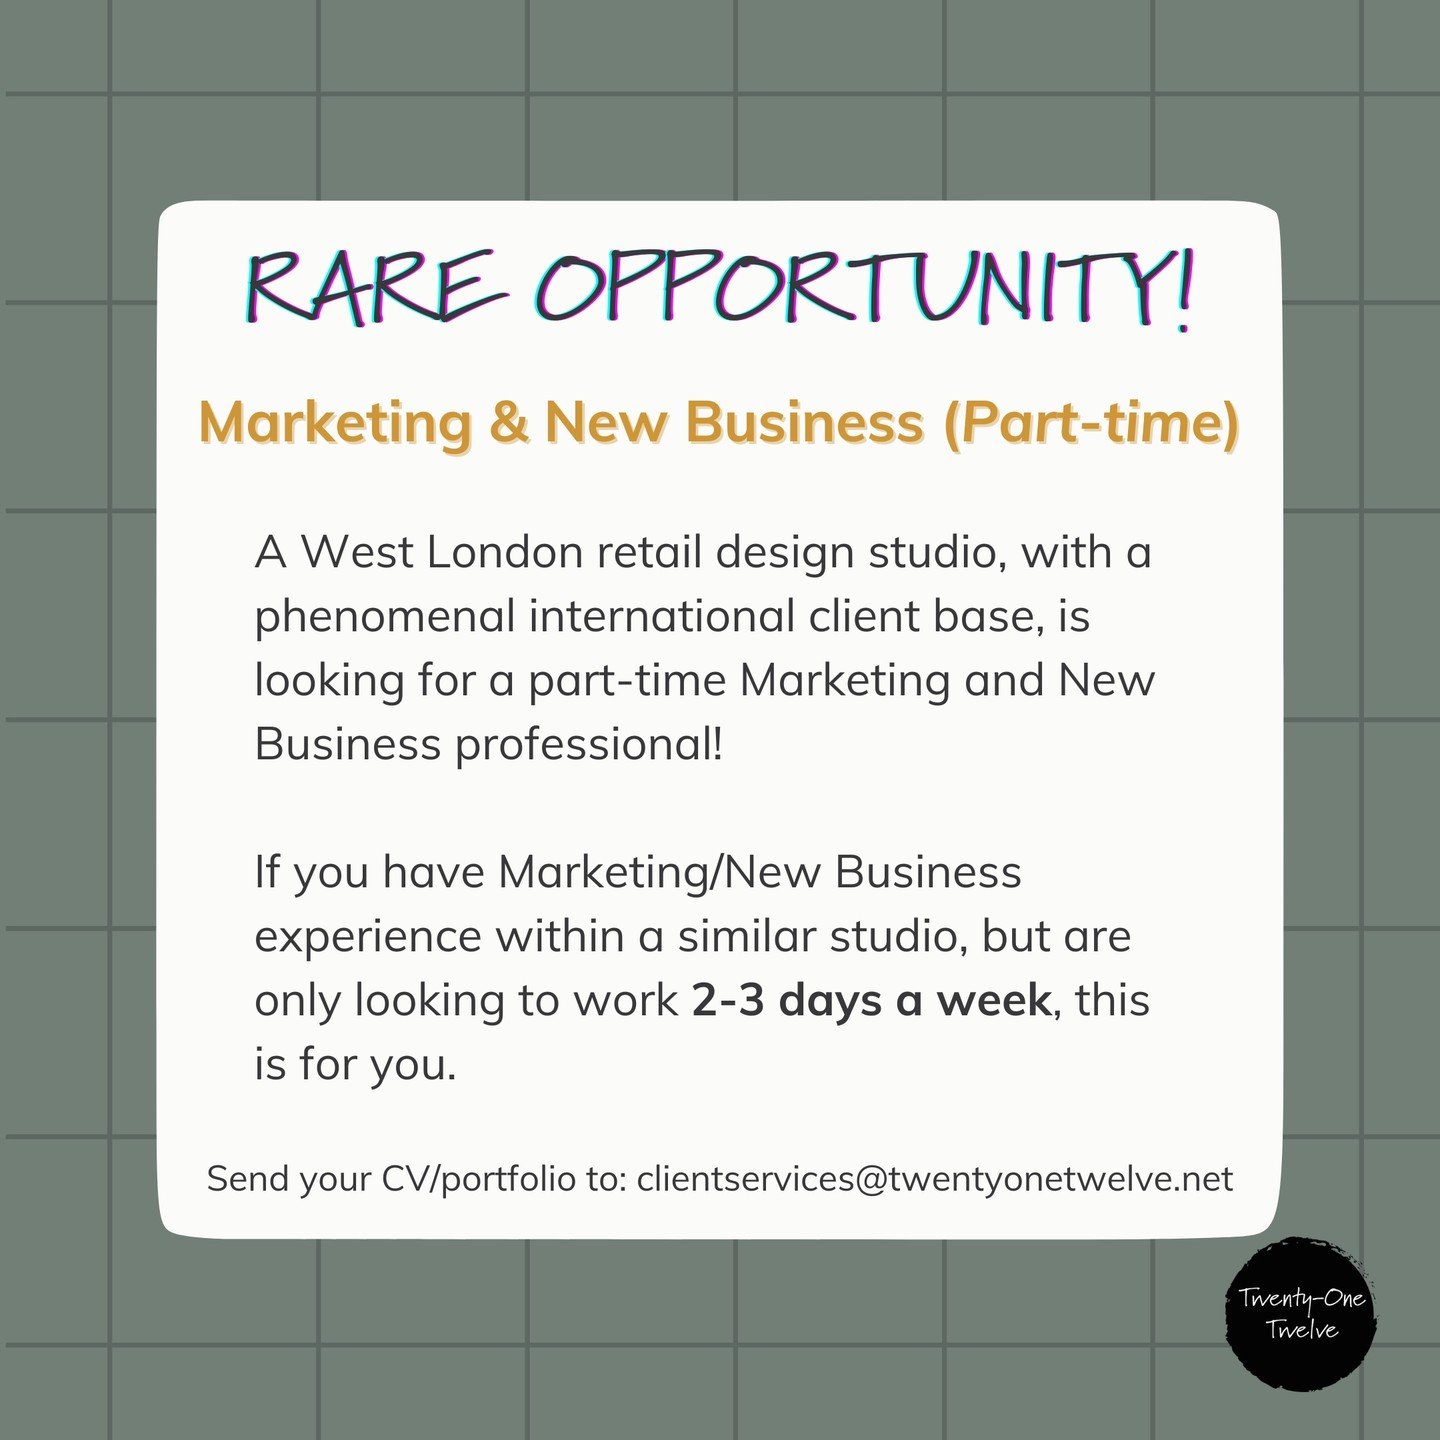 Great part-time opportunity for a Marketing/New Business position based in West London, 2-3 days per week! Send your CV to clientservices@twentyonetwelve.net to apply!